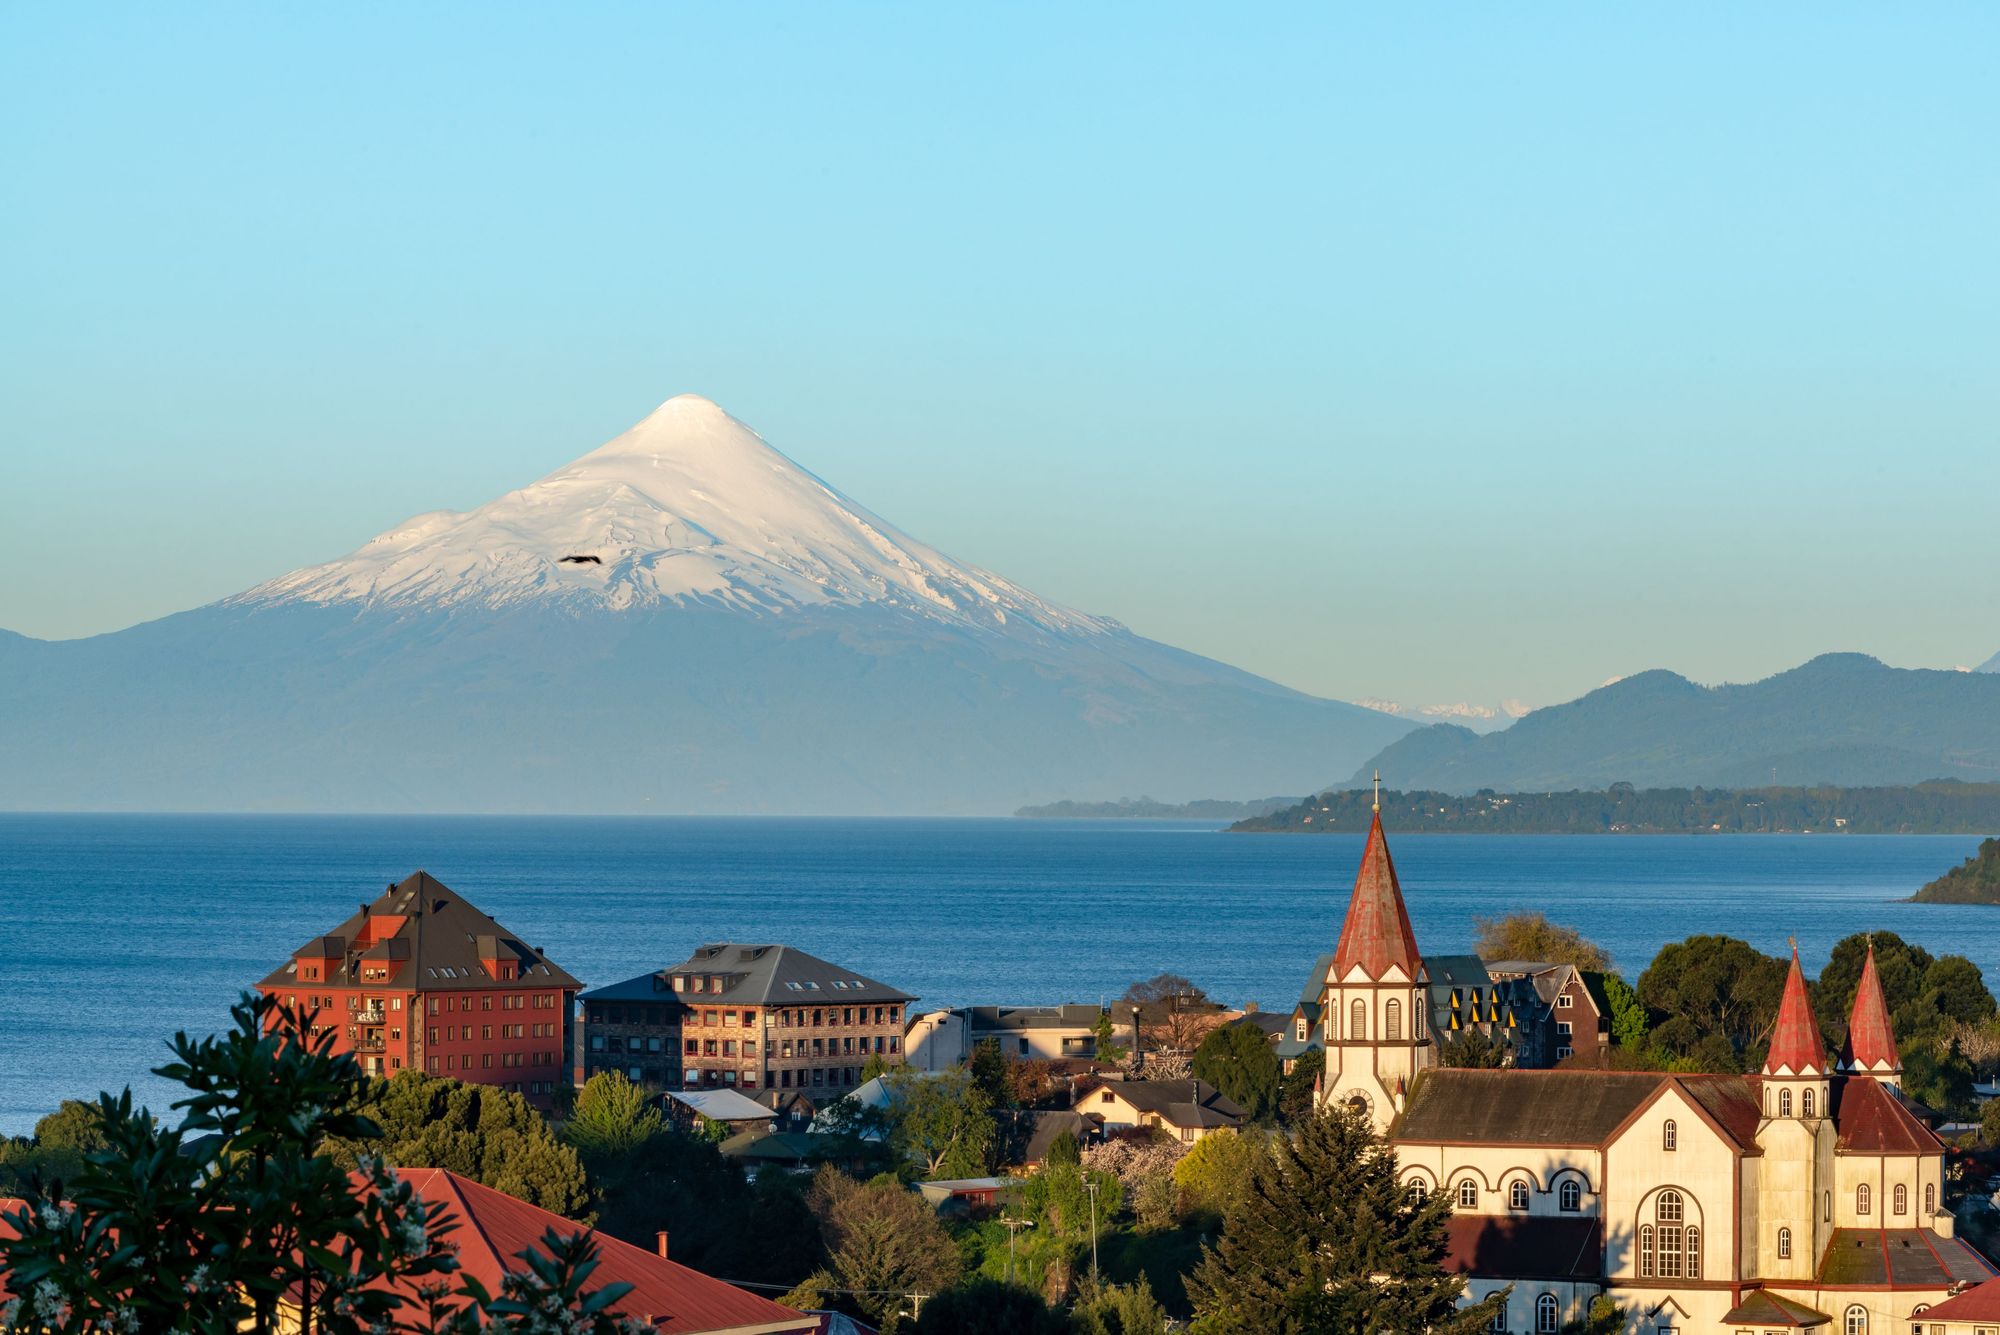 The town of Puerto Varas, backdropped by Lake Llanquihue, Chile's second largest lake. Photo: Getty